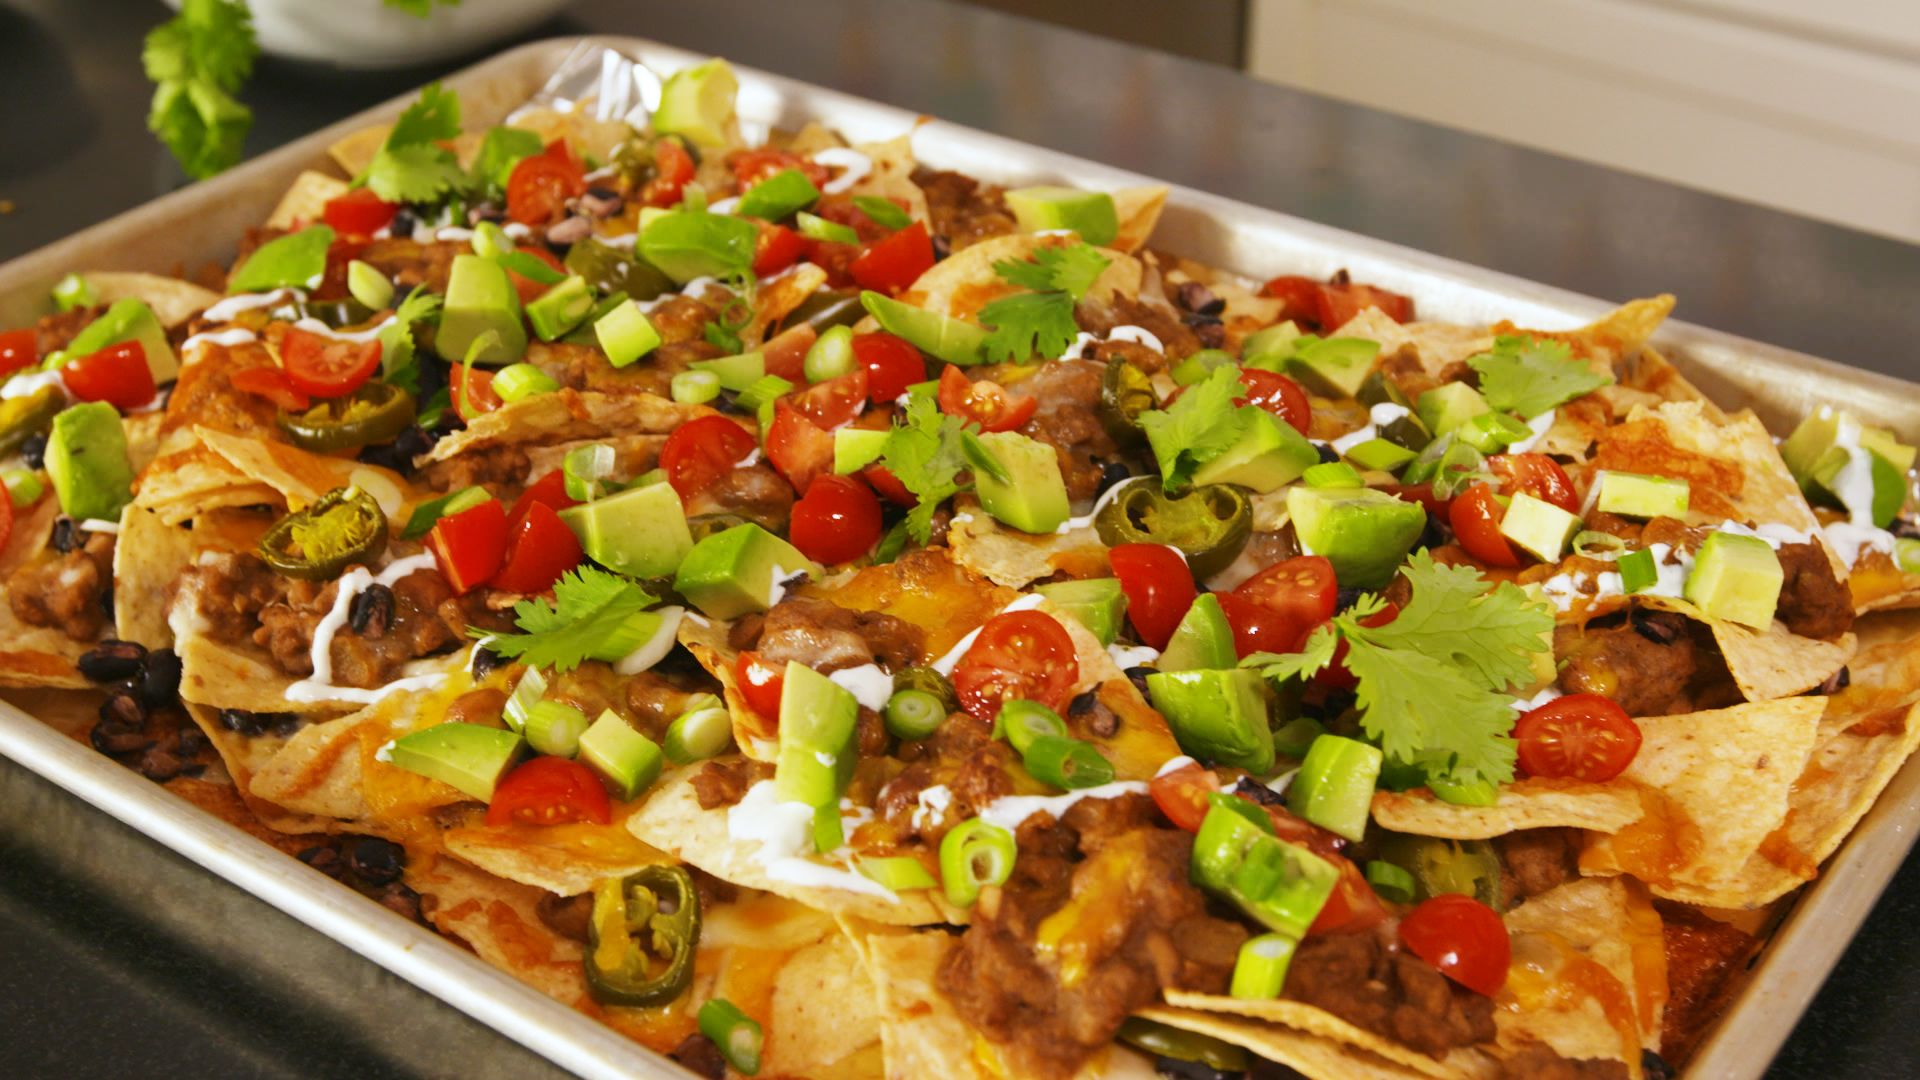 Best Nachos Supreme Recipe How To Make Easy Loaded Nachos At Home